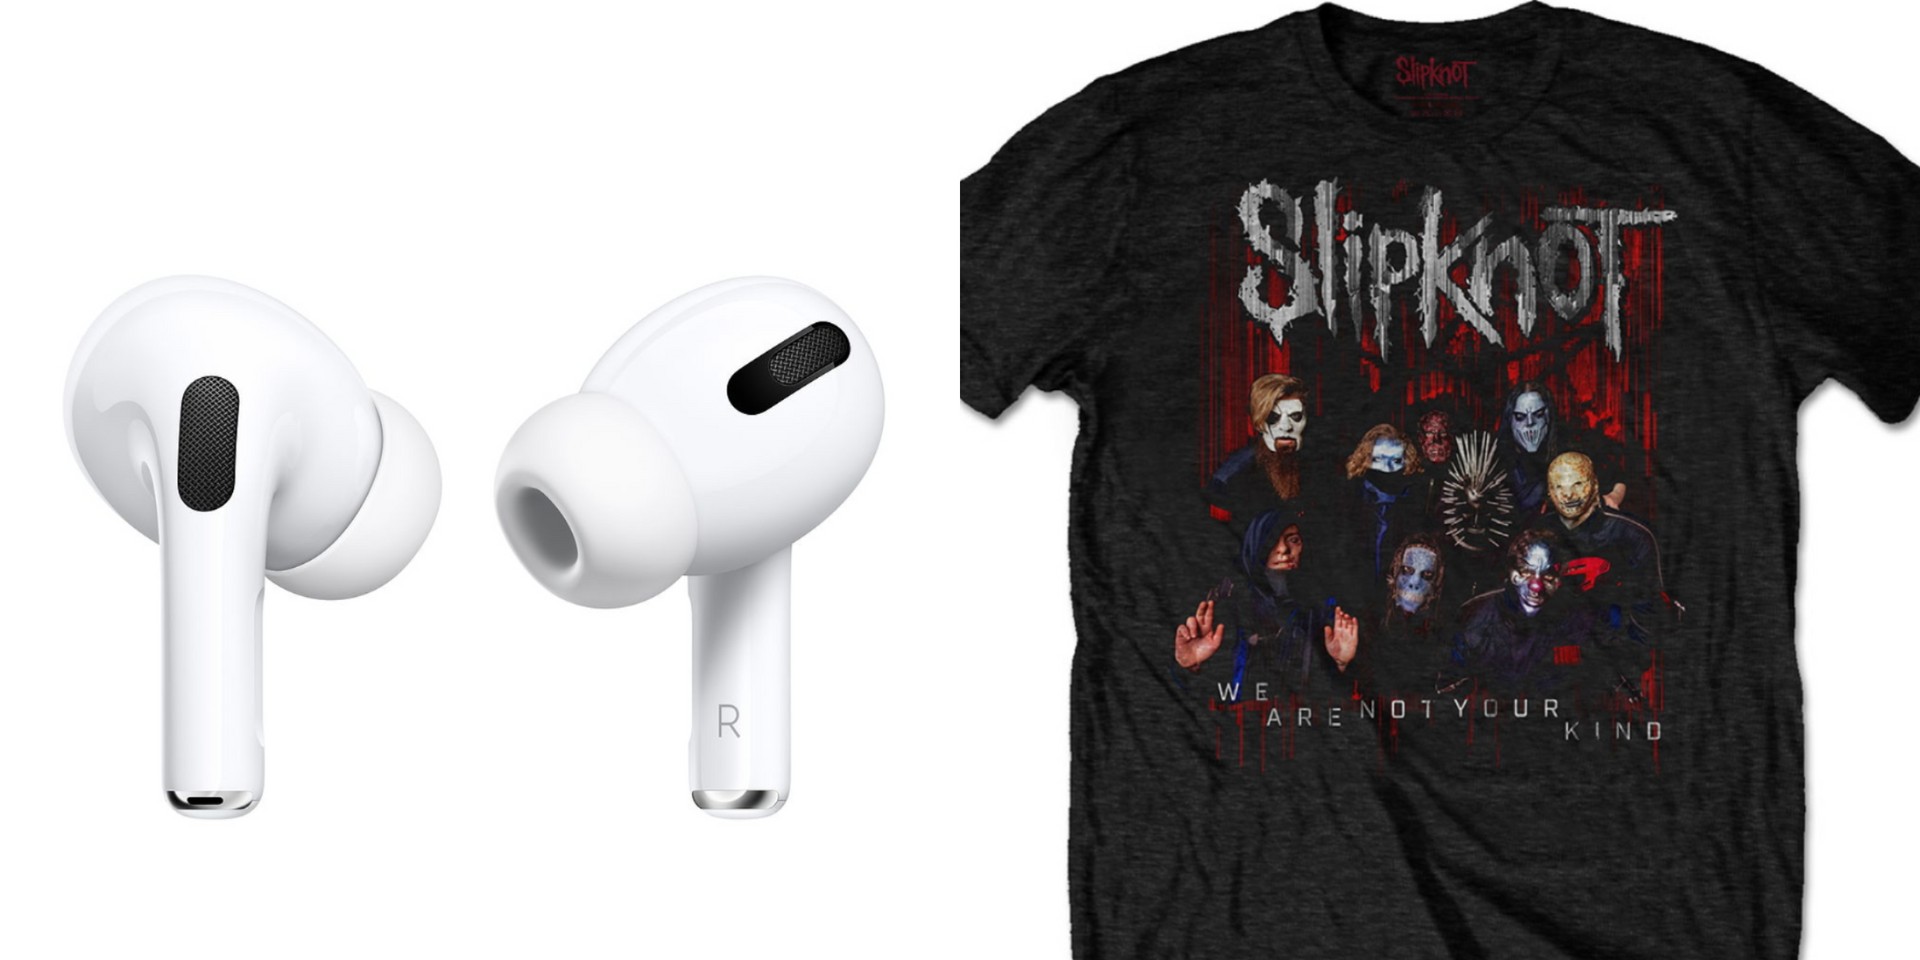 9 Christmas gifts for music lovers in 2019